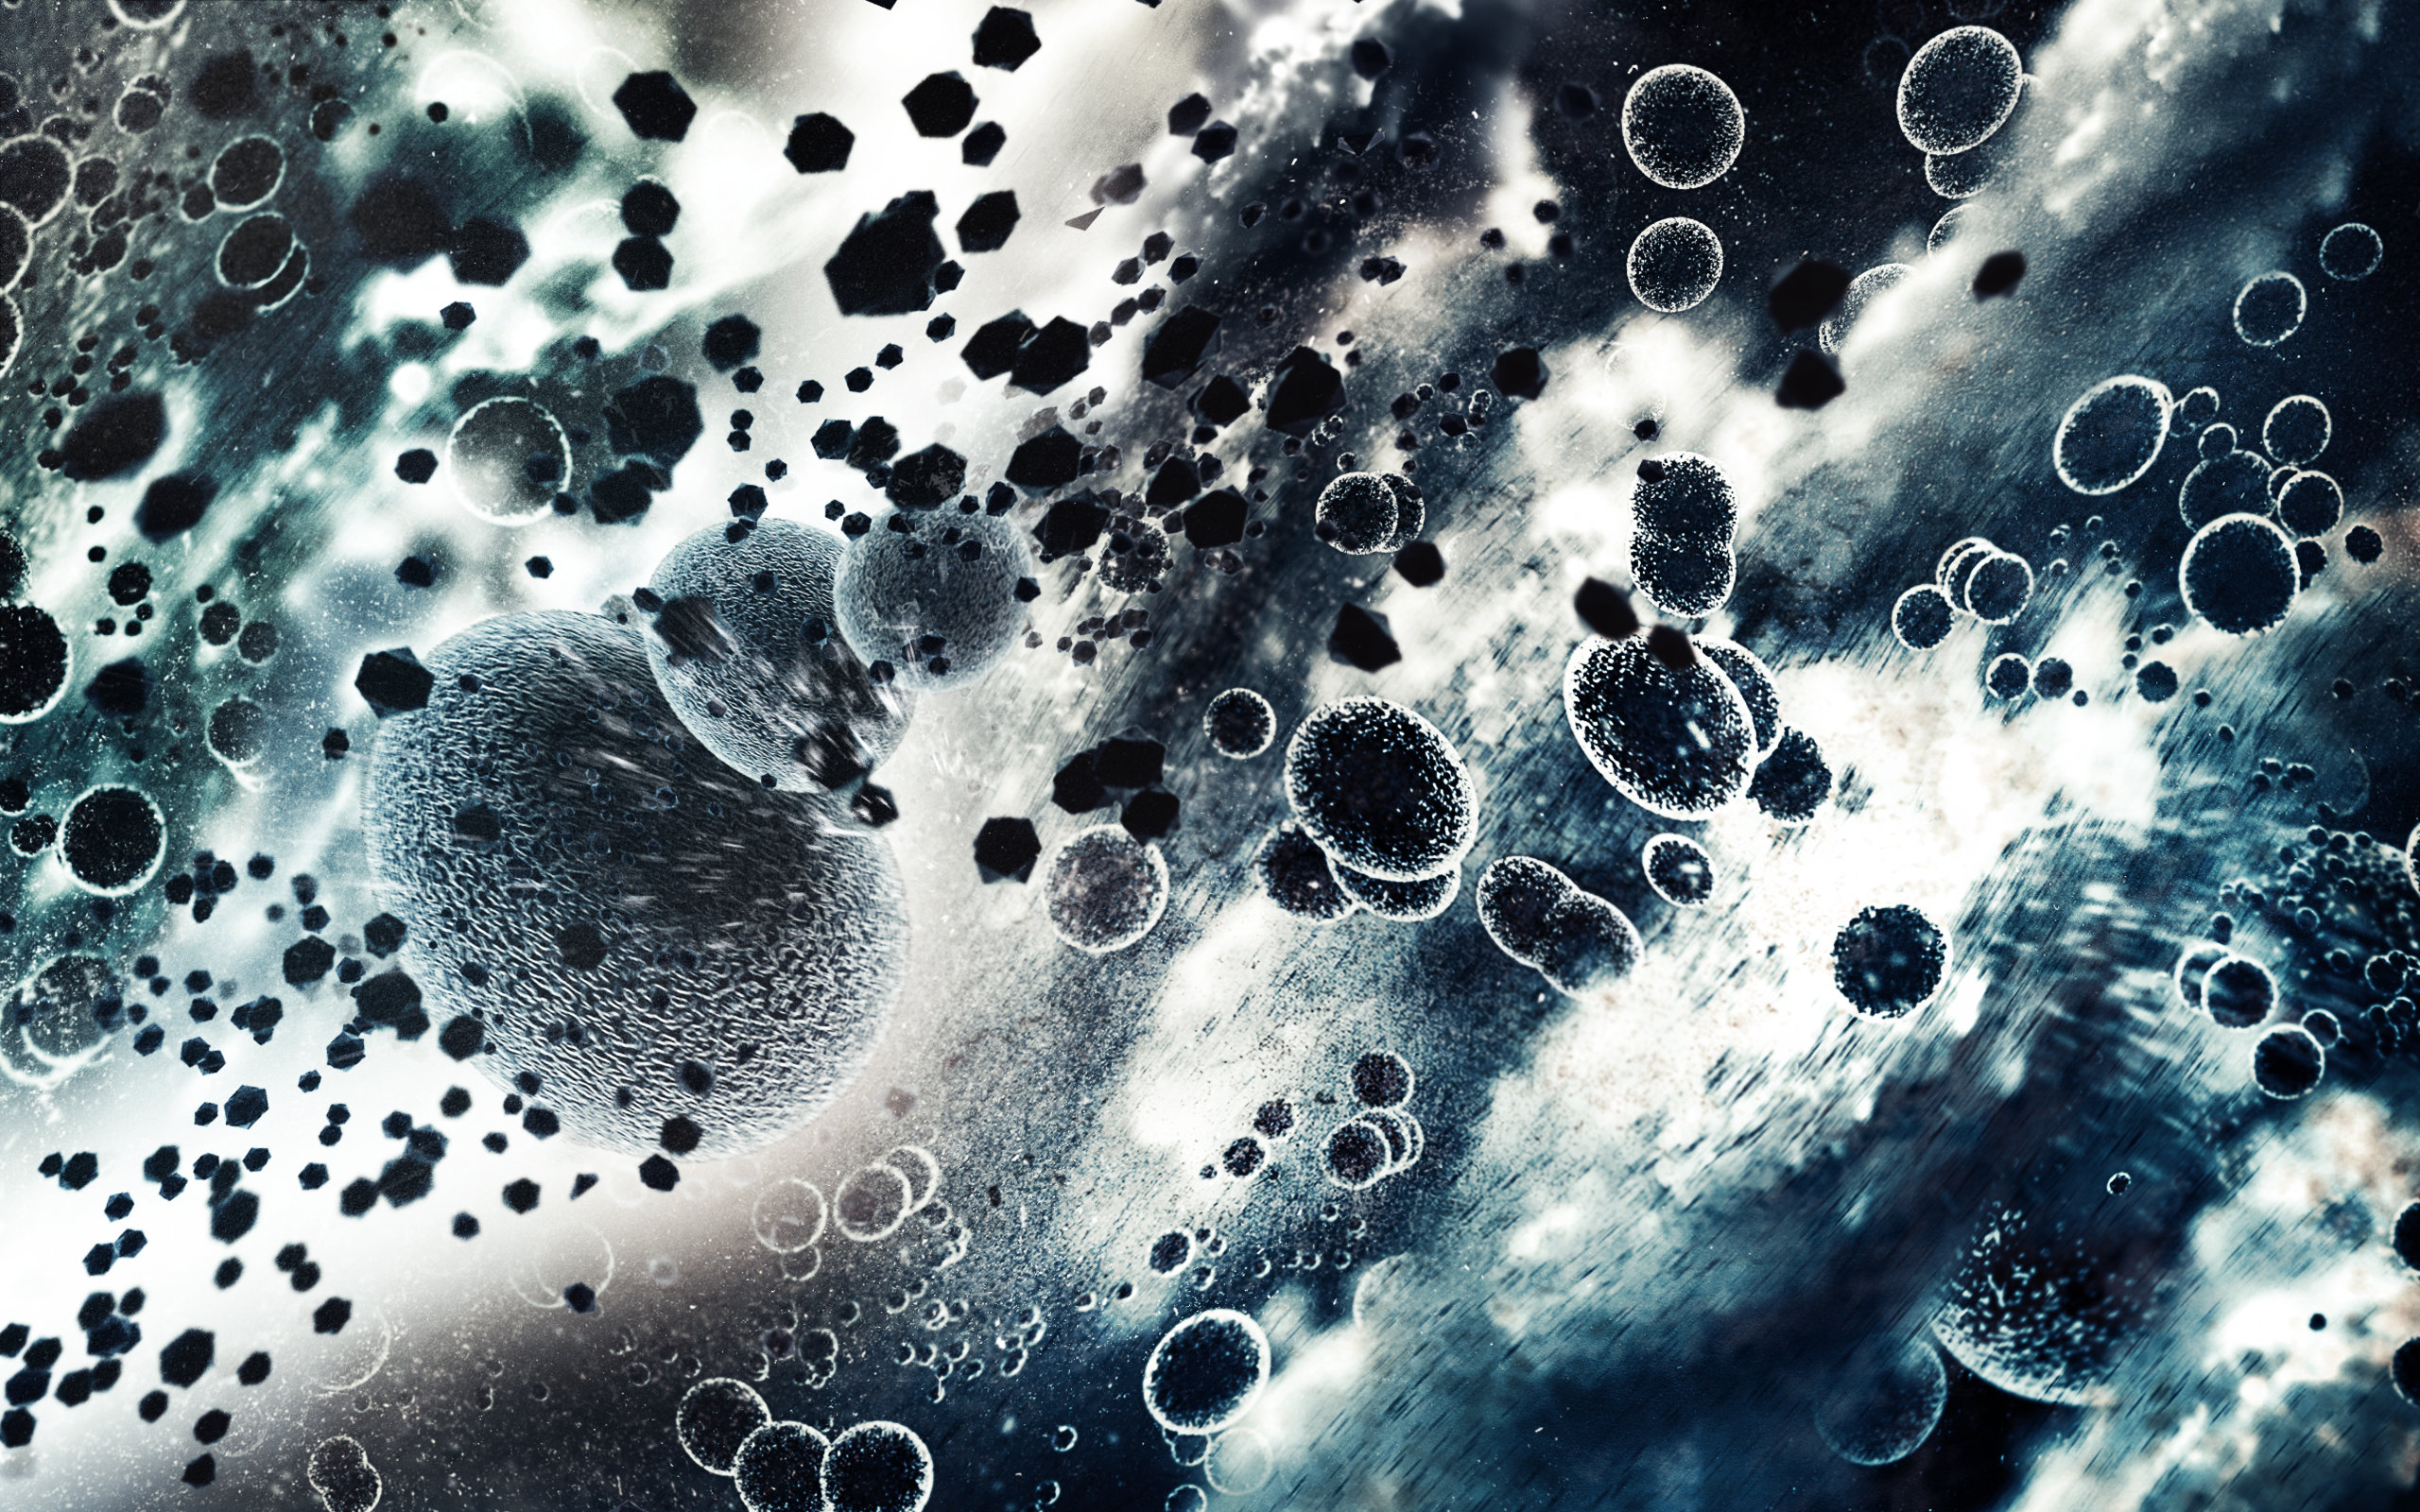 Full HD Wallpaper Abstract By Taner Candan